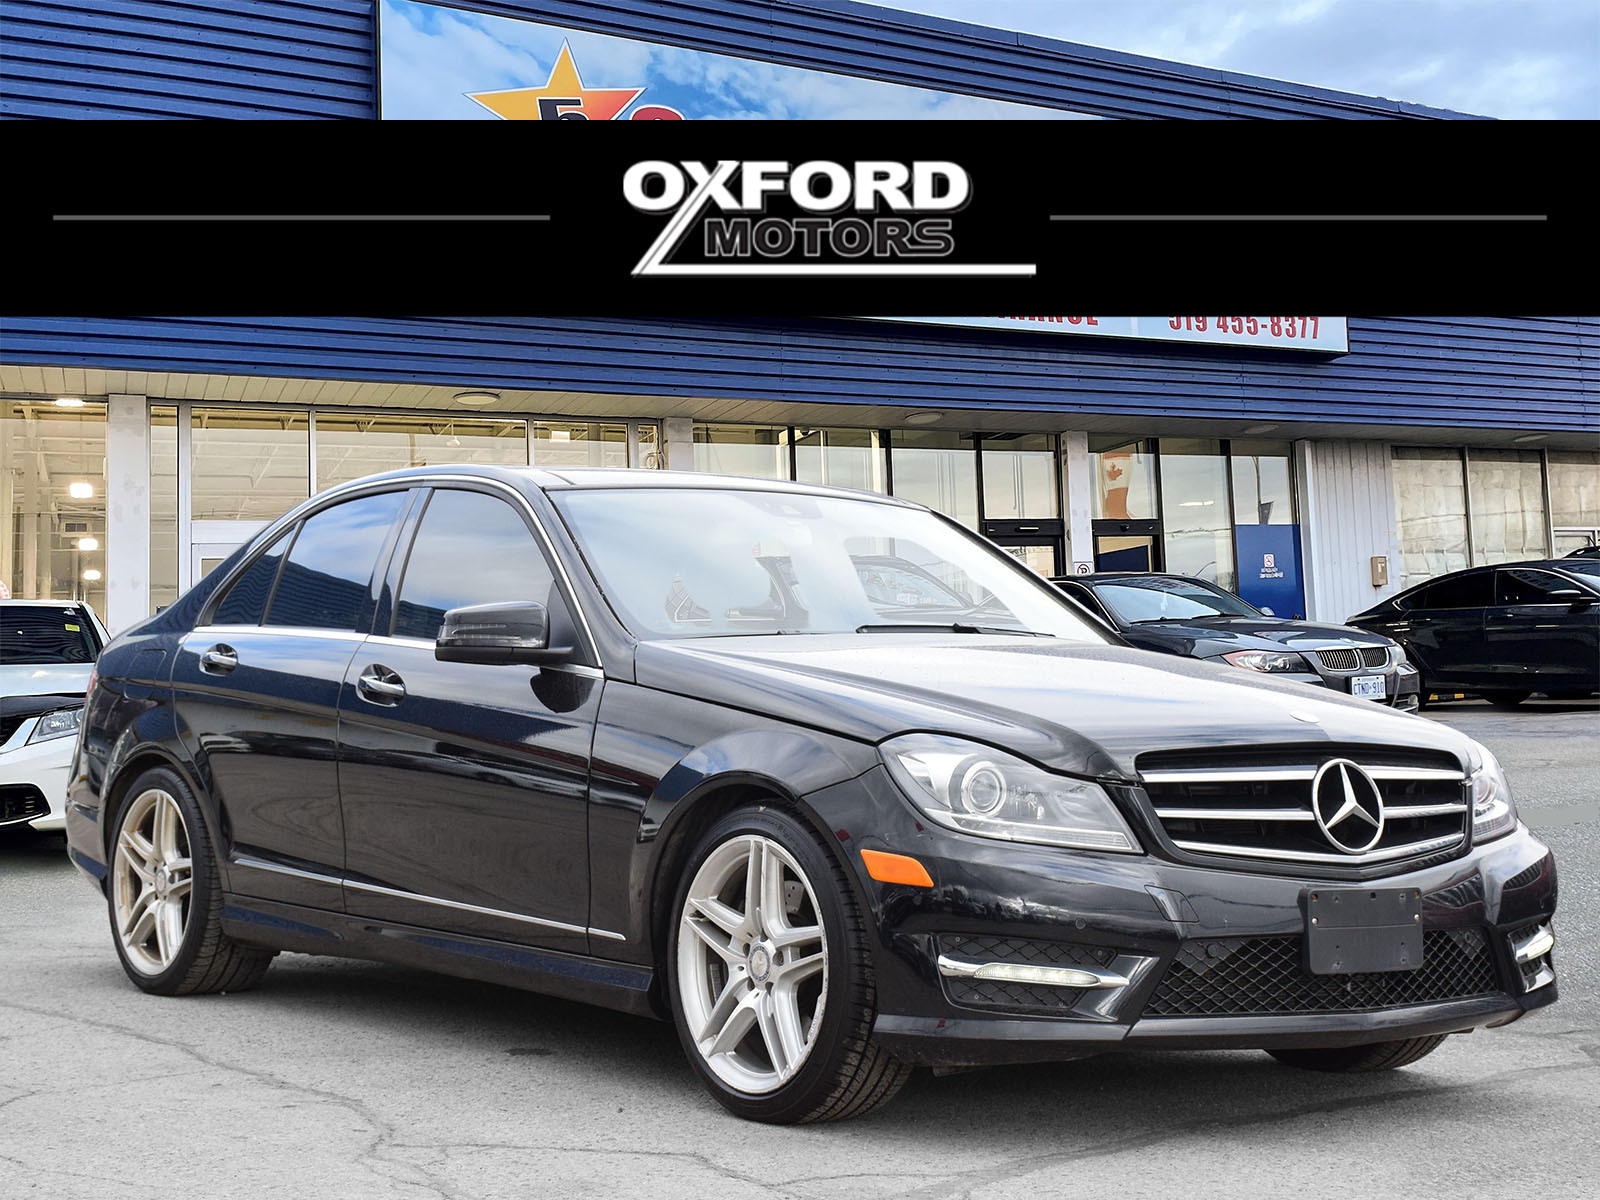 2014 Mercedes-Benz C-Class NAV LEATHER PANO ROOF MINT! WE FINANCE ALL CREDIT!